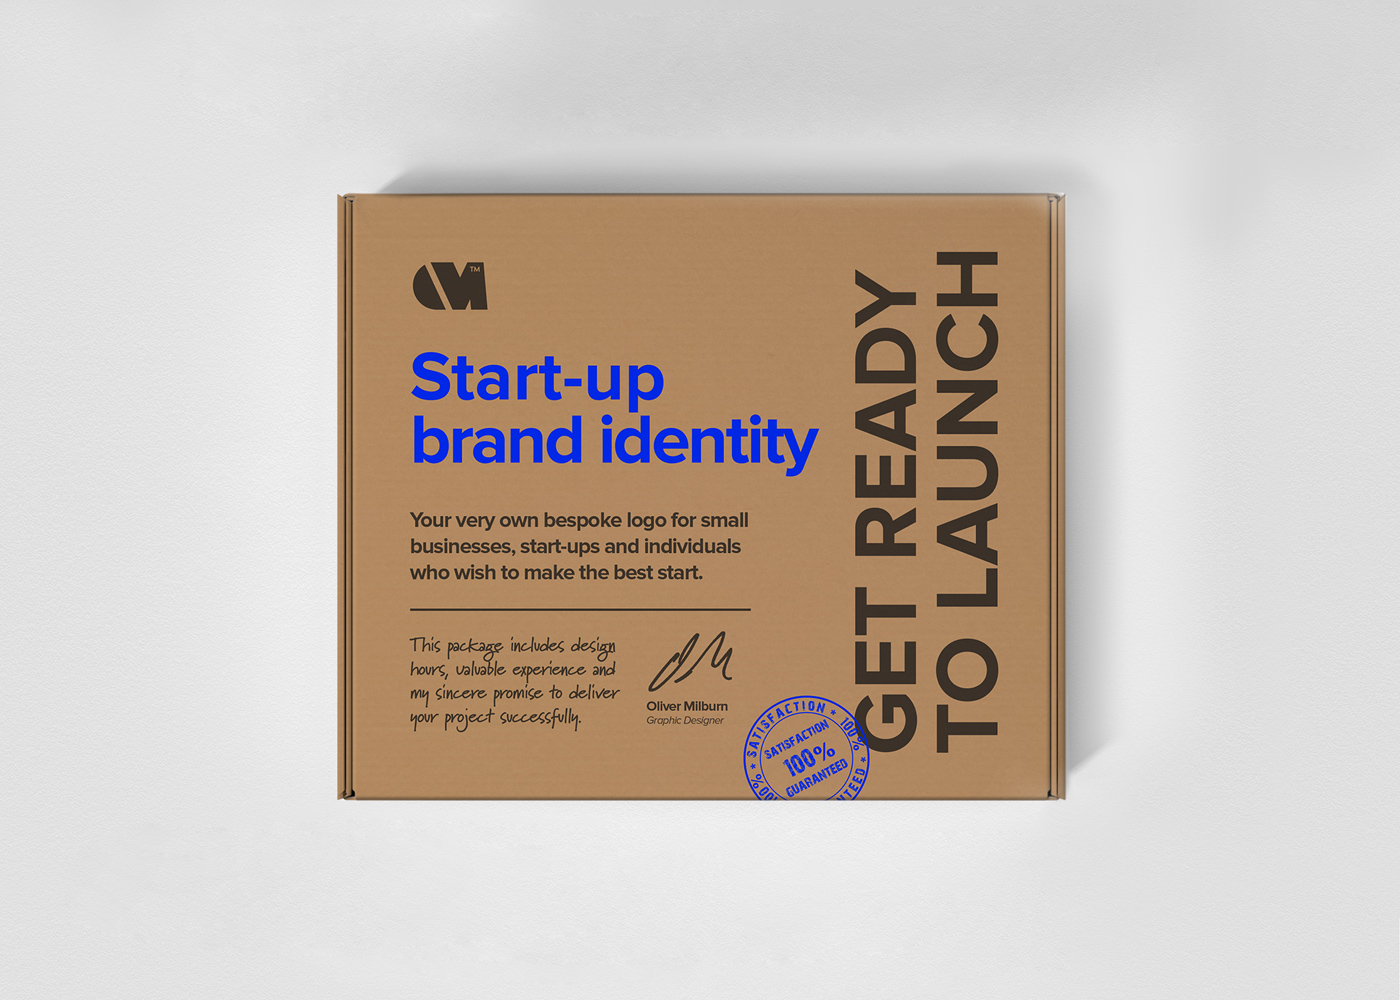 The start-up brand identity design package by Oliver Milburn